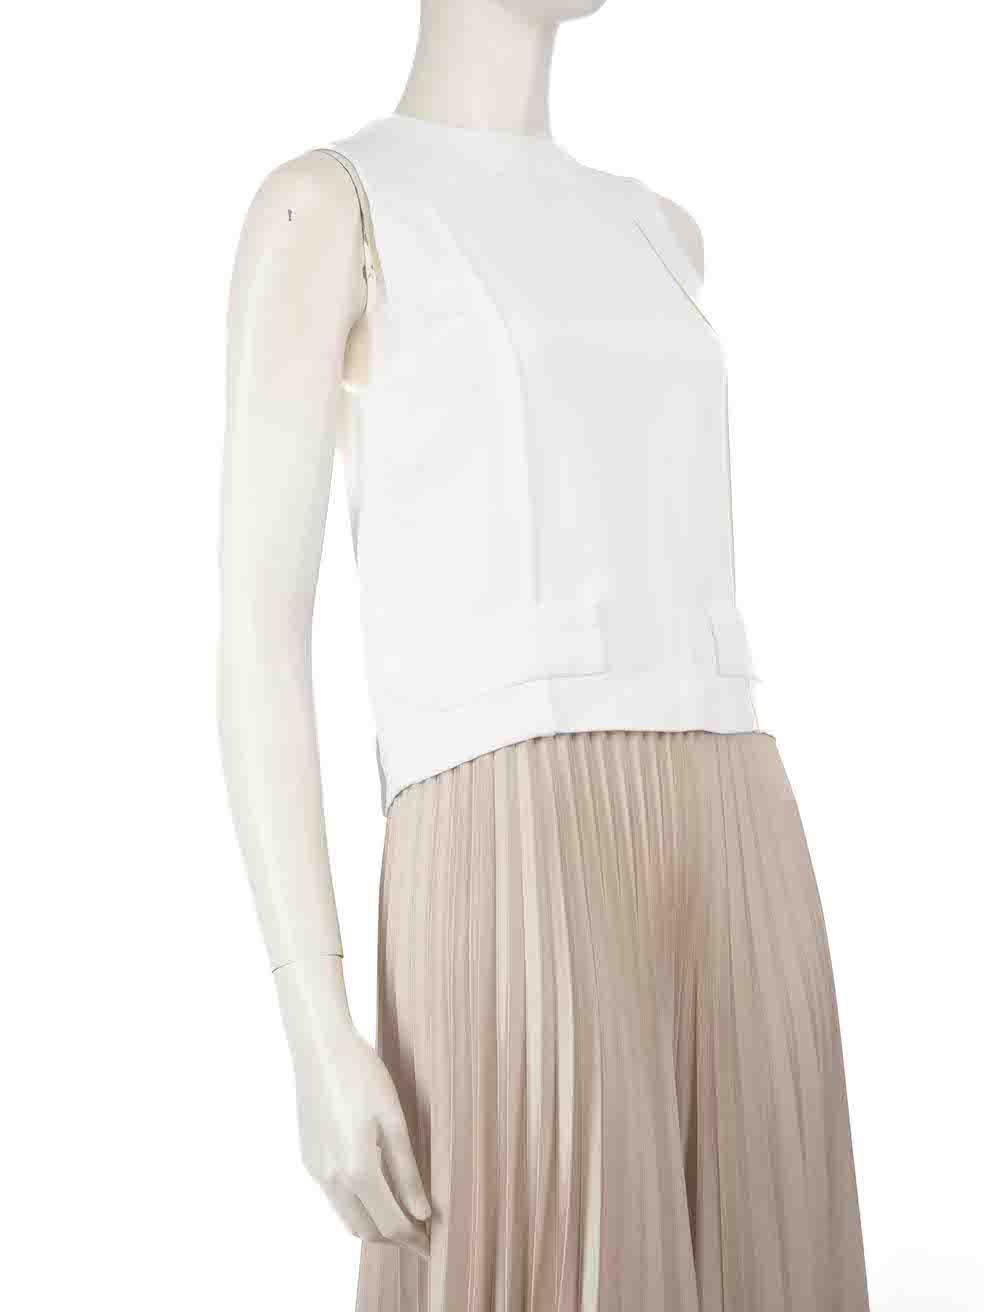 CONDITION is Very good. Minimal wear to vest is evident. Minimal discolouration to centre front and rear shoulder on this used Miu Miu designer resale item.
 
 
 
 Details
 
 
 Ecru
 
 Viscose
 
 Top
 
 Back button up fastening
 
 Sleeveless
 
 
 
